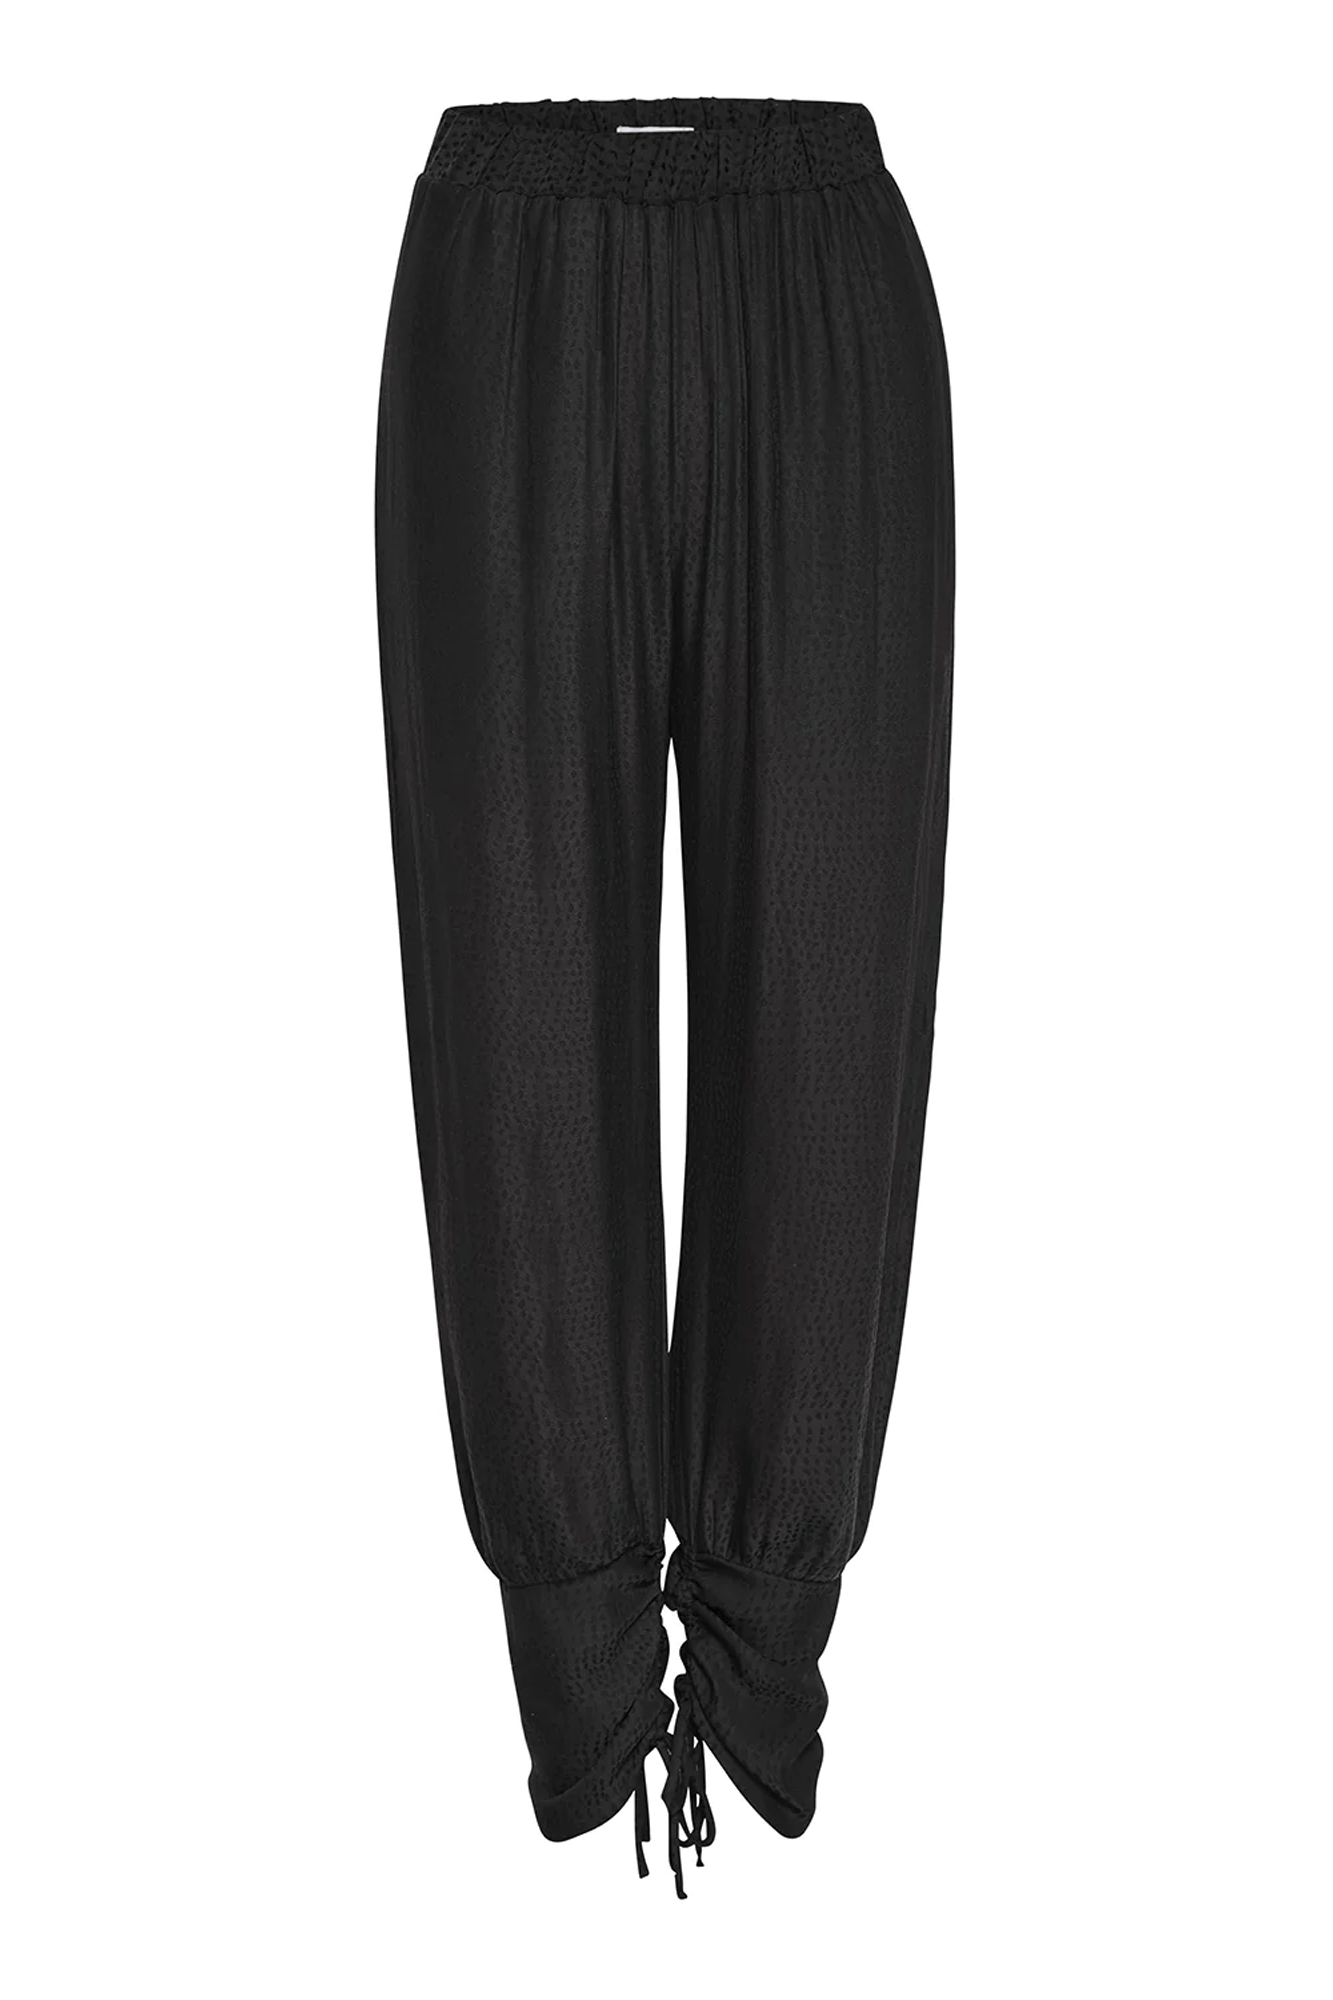 Experience luxurious comfort and impeccable style with the Margot Pant from Misa. Crafted from tonal black dot print satin jacquard, this jogger pant features adjustable hems, an elastic waistband, and side-slit pockets for convenience. Enjoy a day of off-duty chic and timeless sophistication.